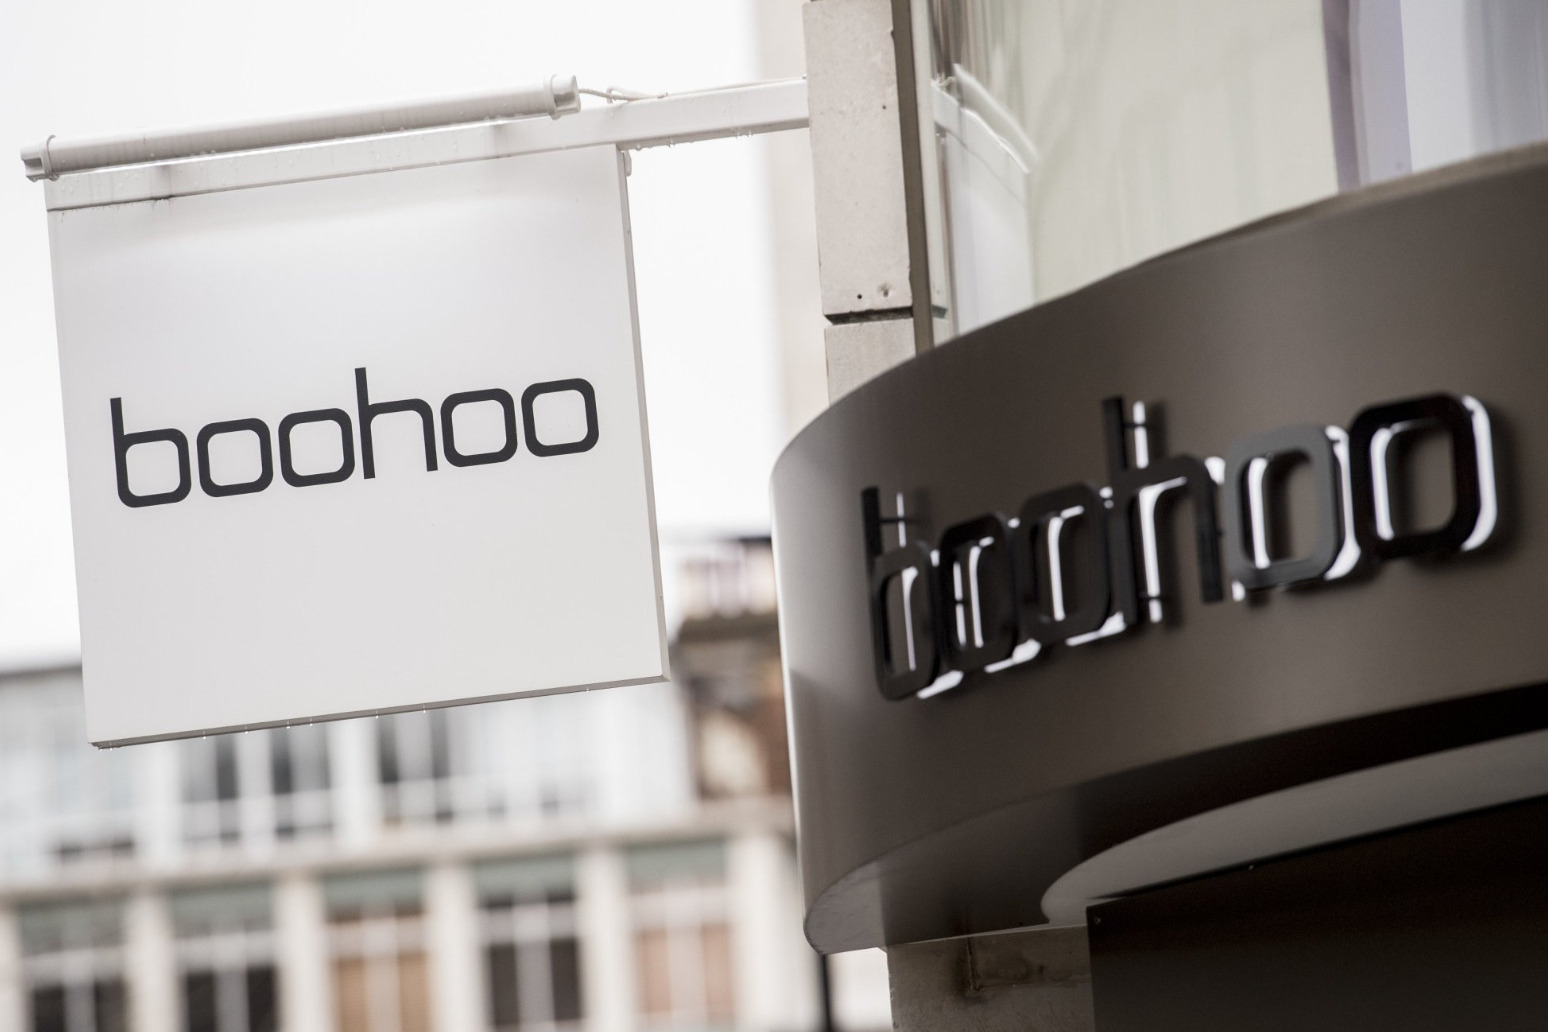 Boohoo shareholders narrowly approve plan which could hand boss £50m bonus 